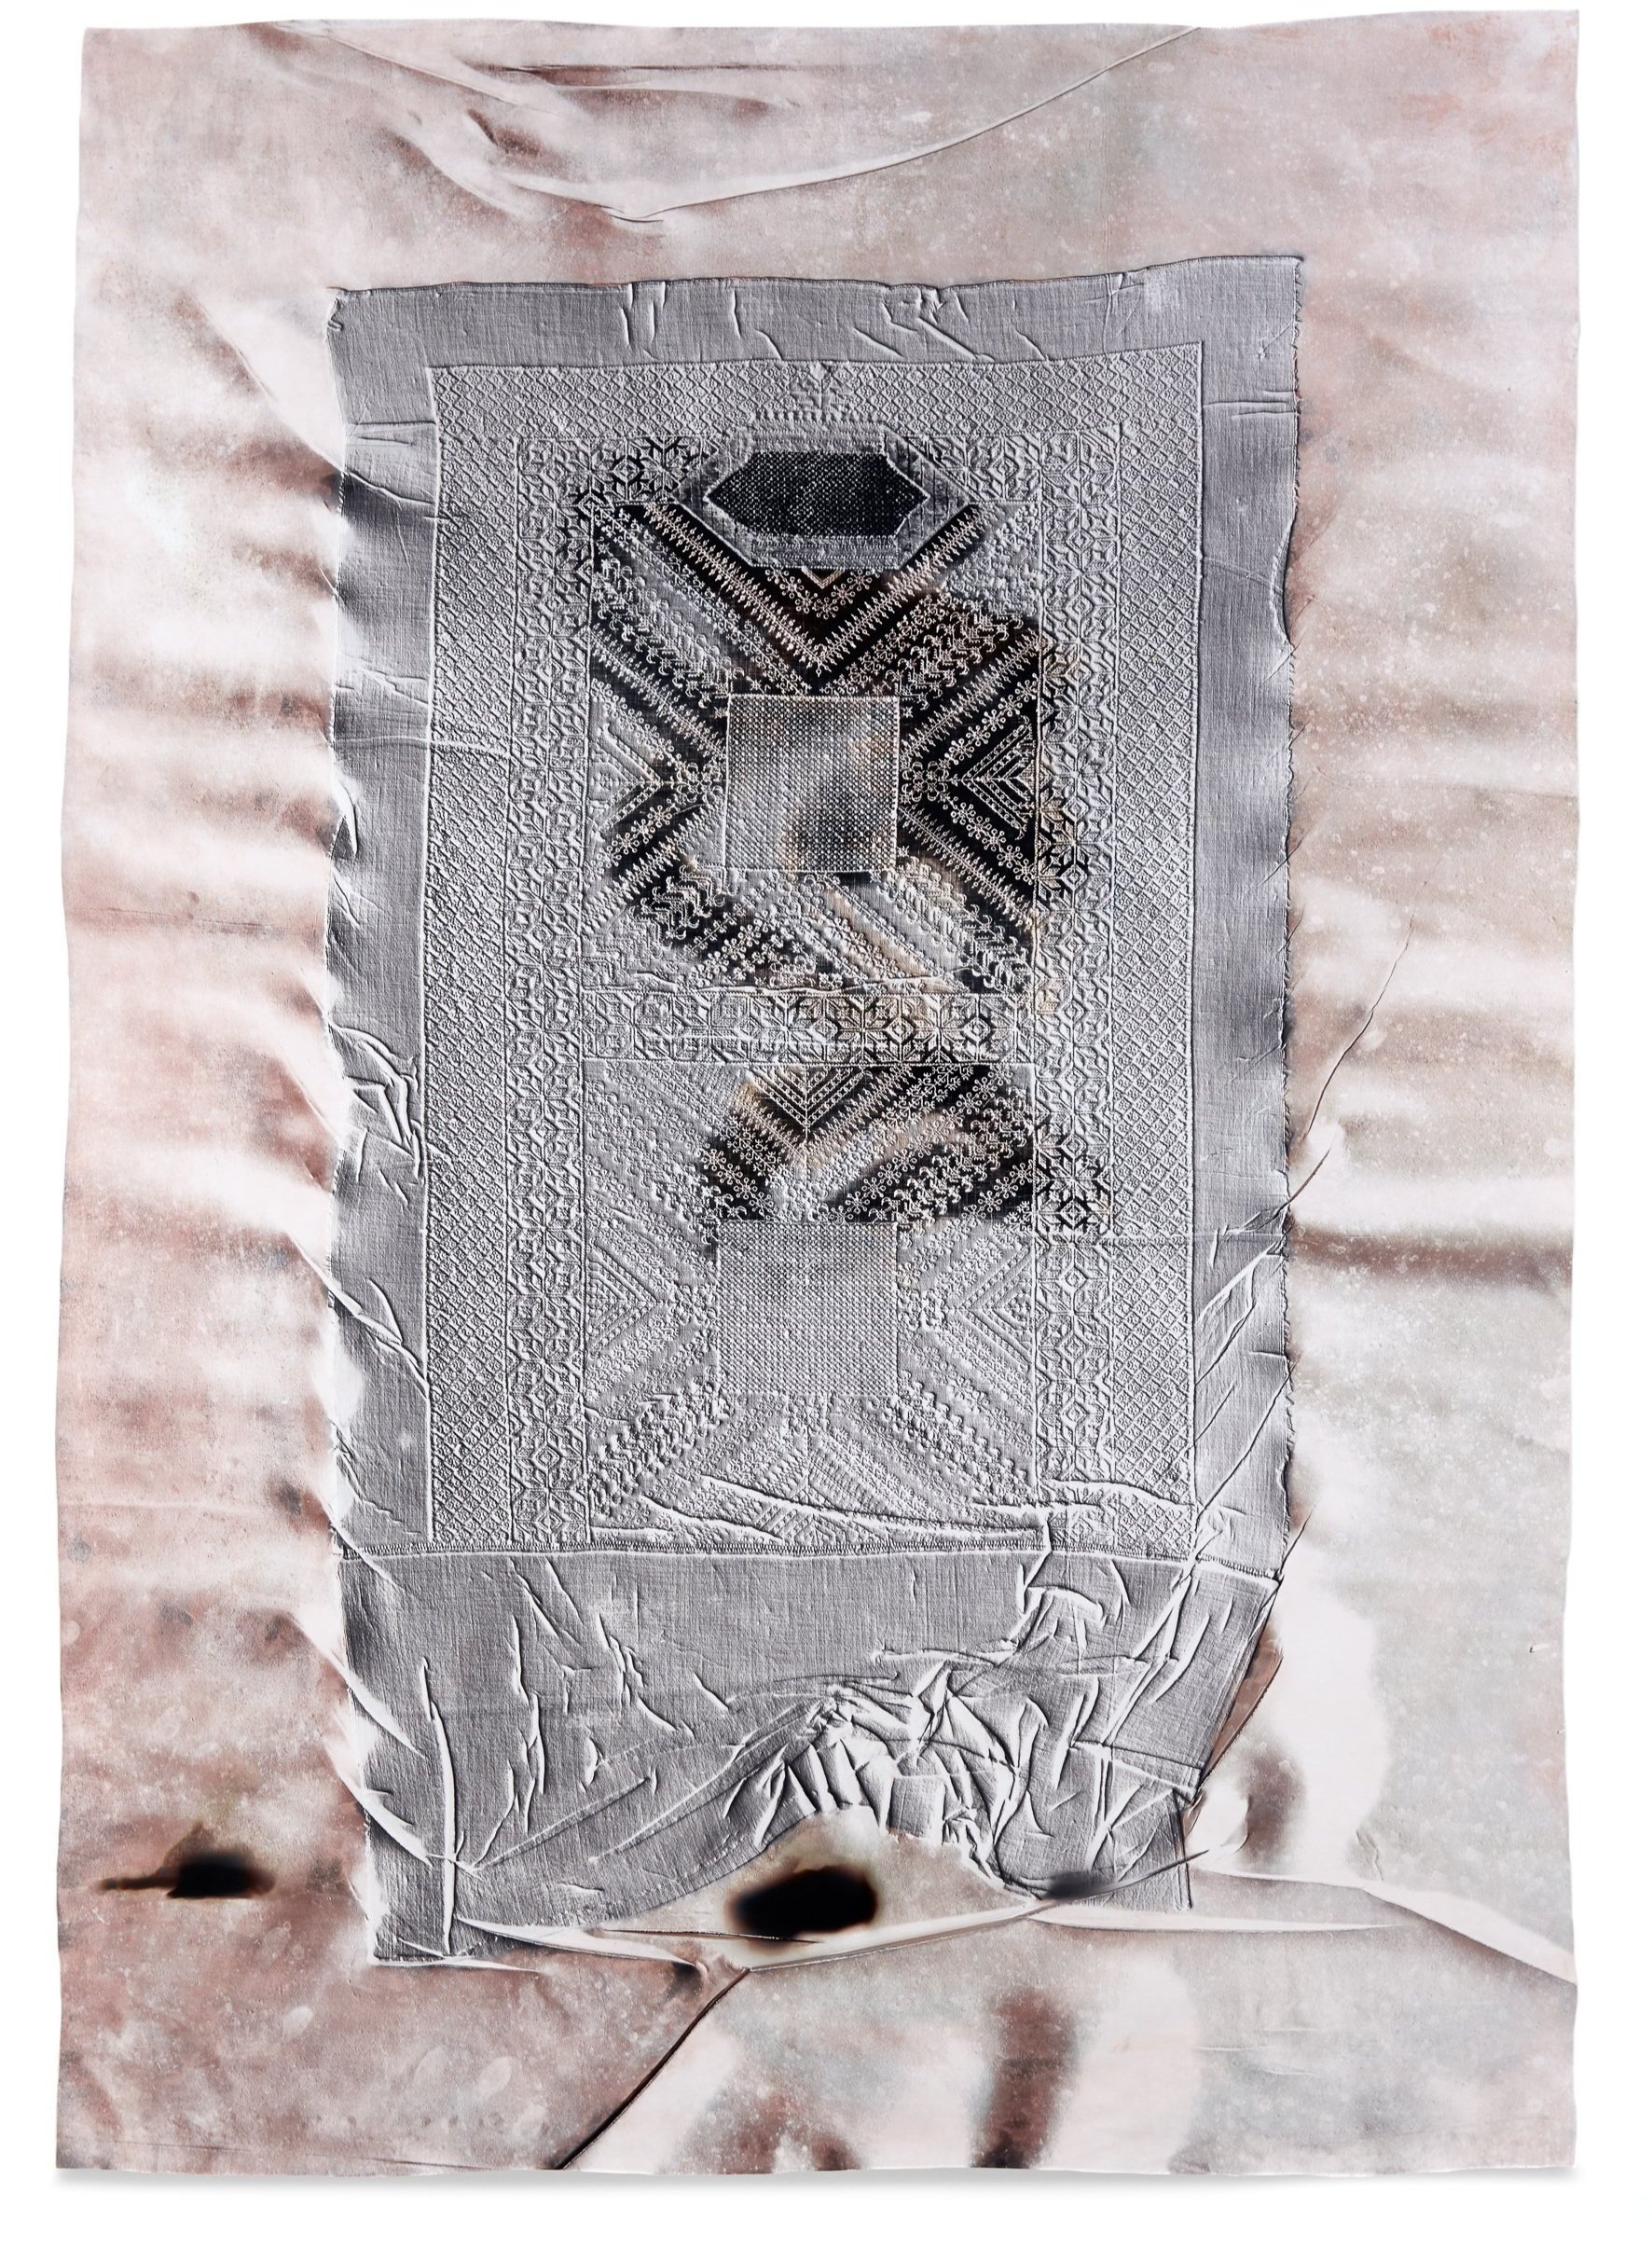   Your Eyes Aren't Eyes. They're Bees 2,  2018 Photographic relief (embossed silver gelatin photogram, copper and sepia toned) Impression of hand-embroidered burqa face veil (Afghanistan, 1970s)  41 x 29 in 